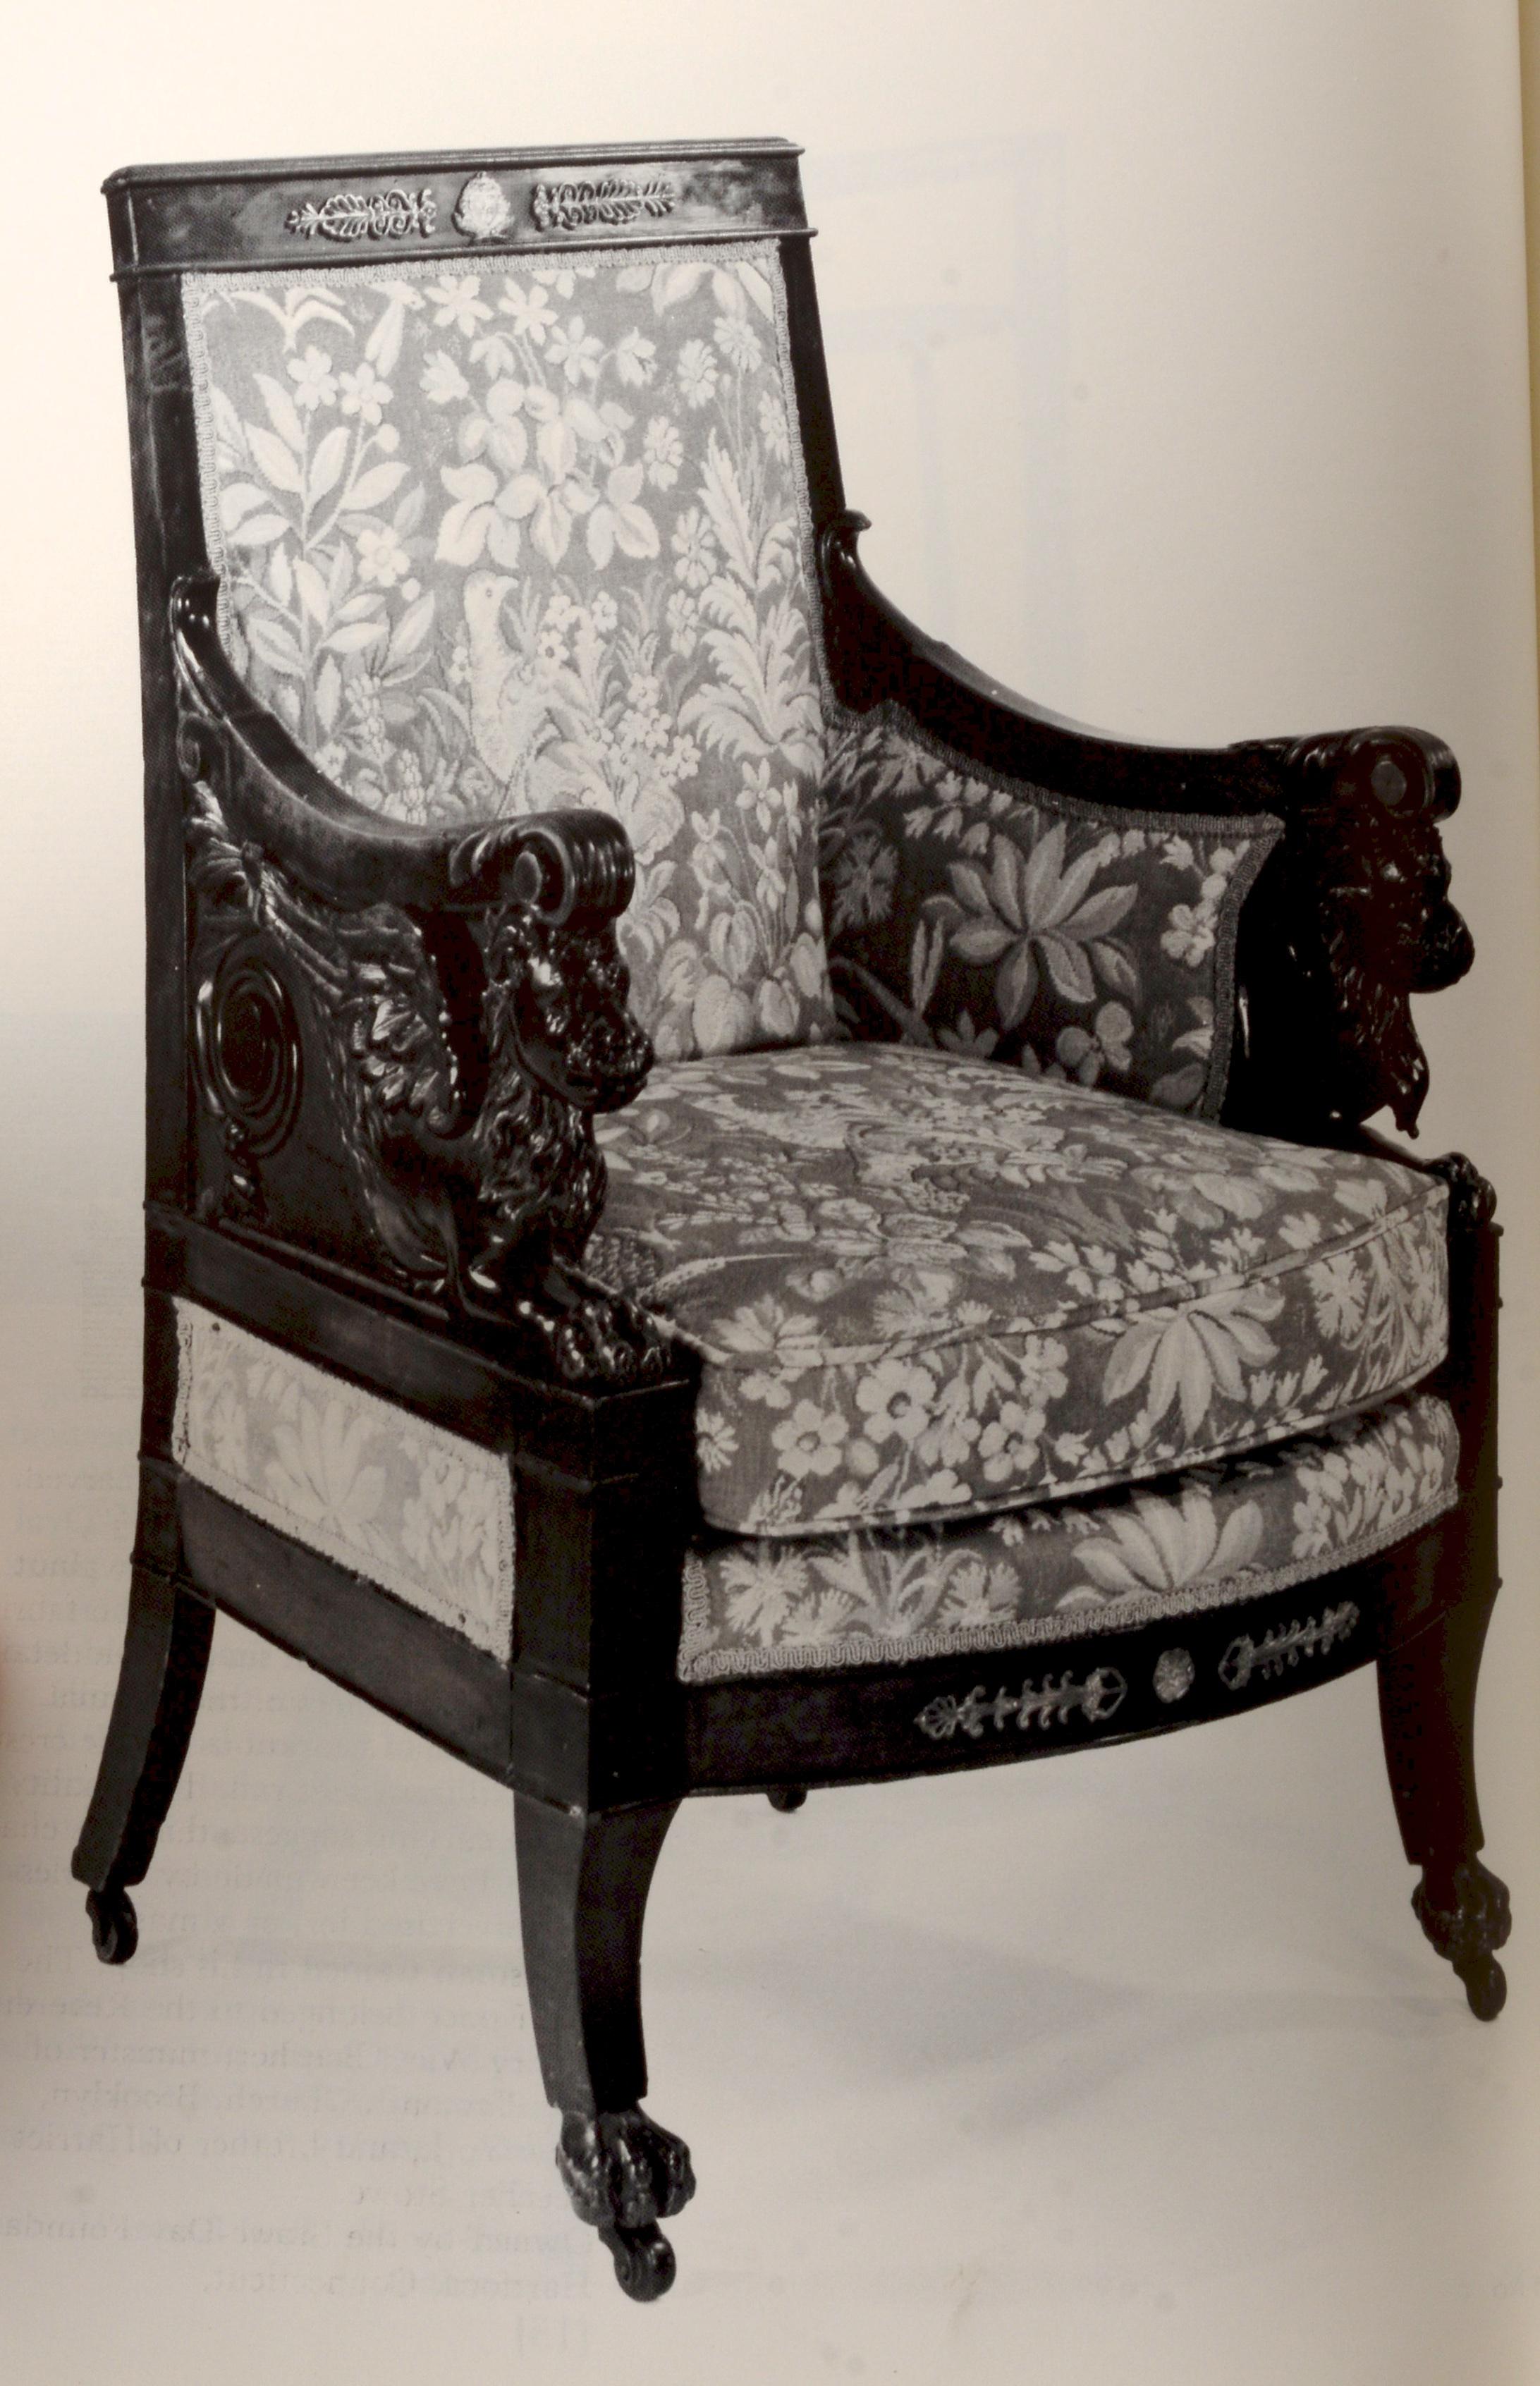 Selection of 19th c American Chairs, Exhib. Catalog Signed by the Author, 1st Ed For Sale 2